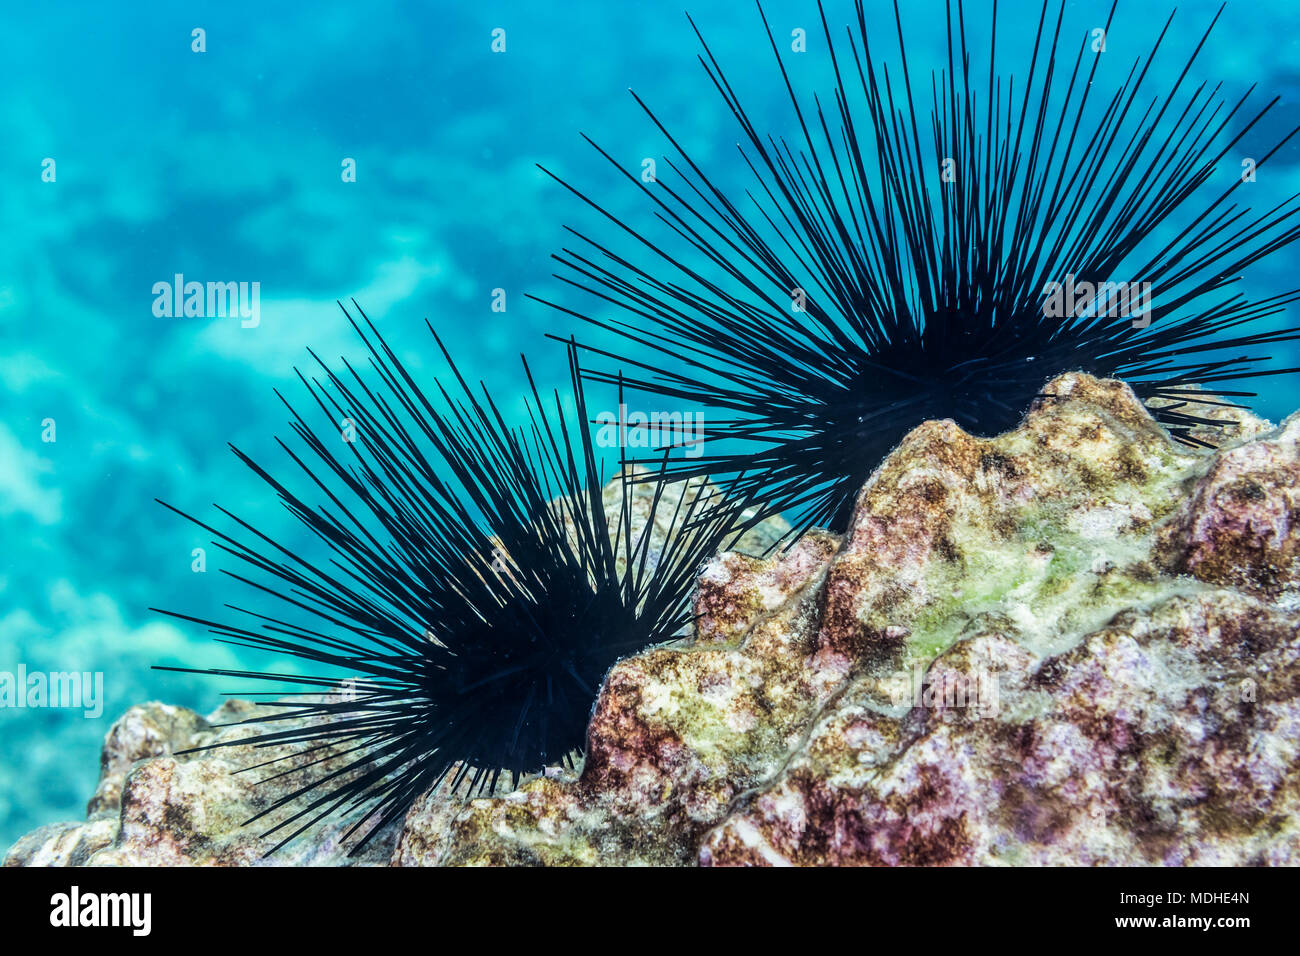 This pair of venomous long-spined urchins (Diadema paucispinum) perched on a reef was photographed while scuba diving along the Kona Coast Stock Photo